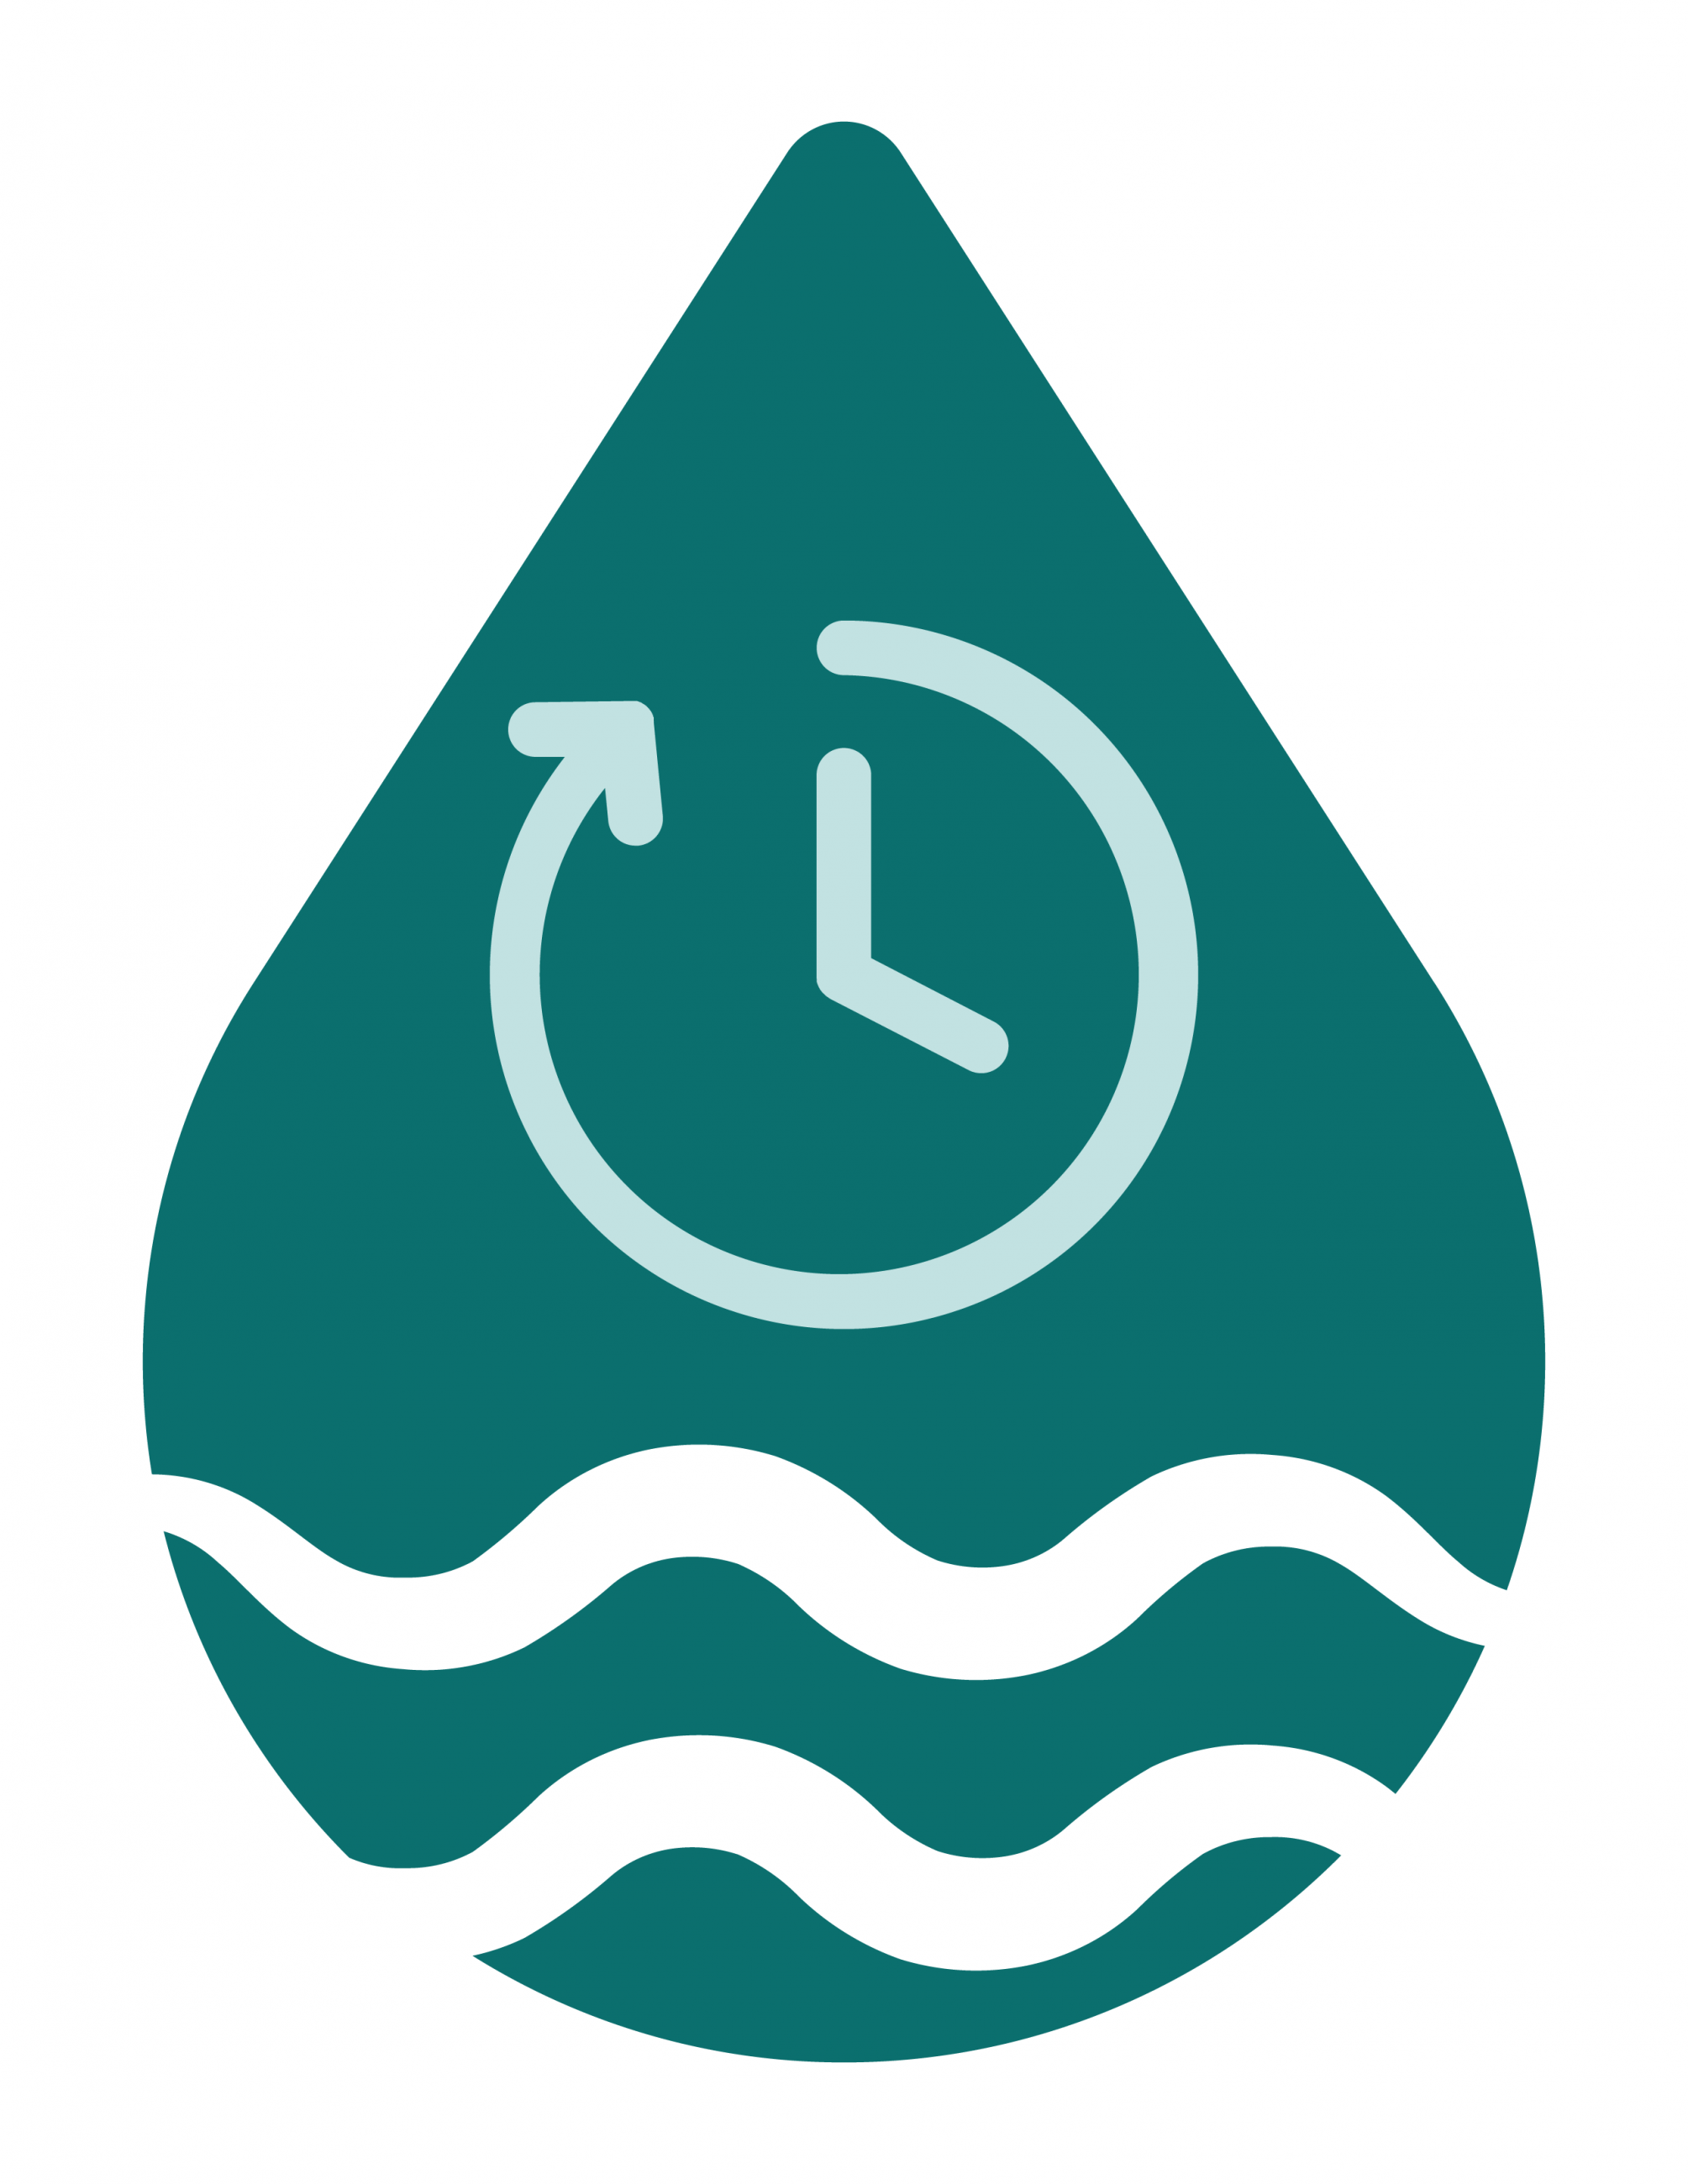 Historical flood events icon